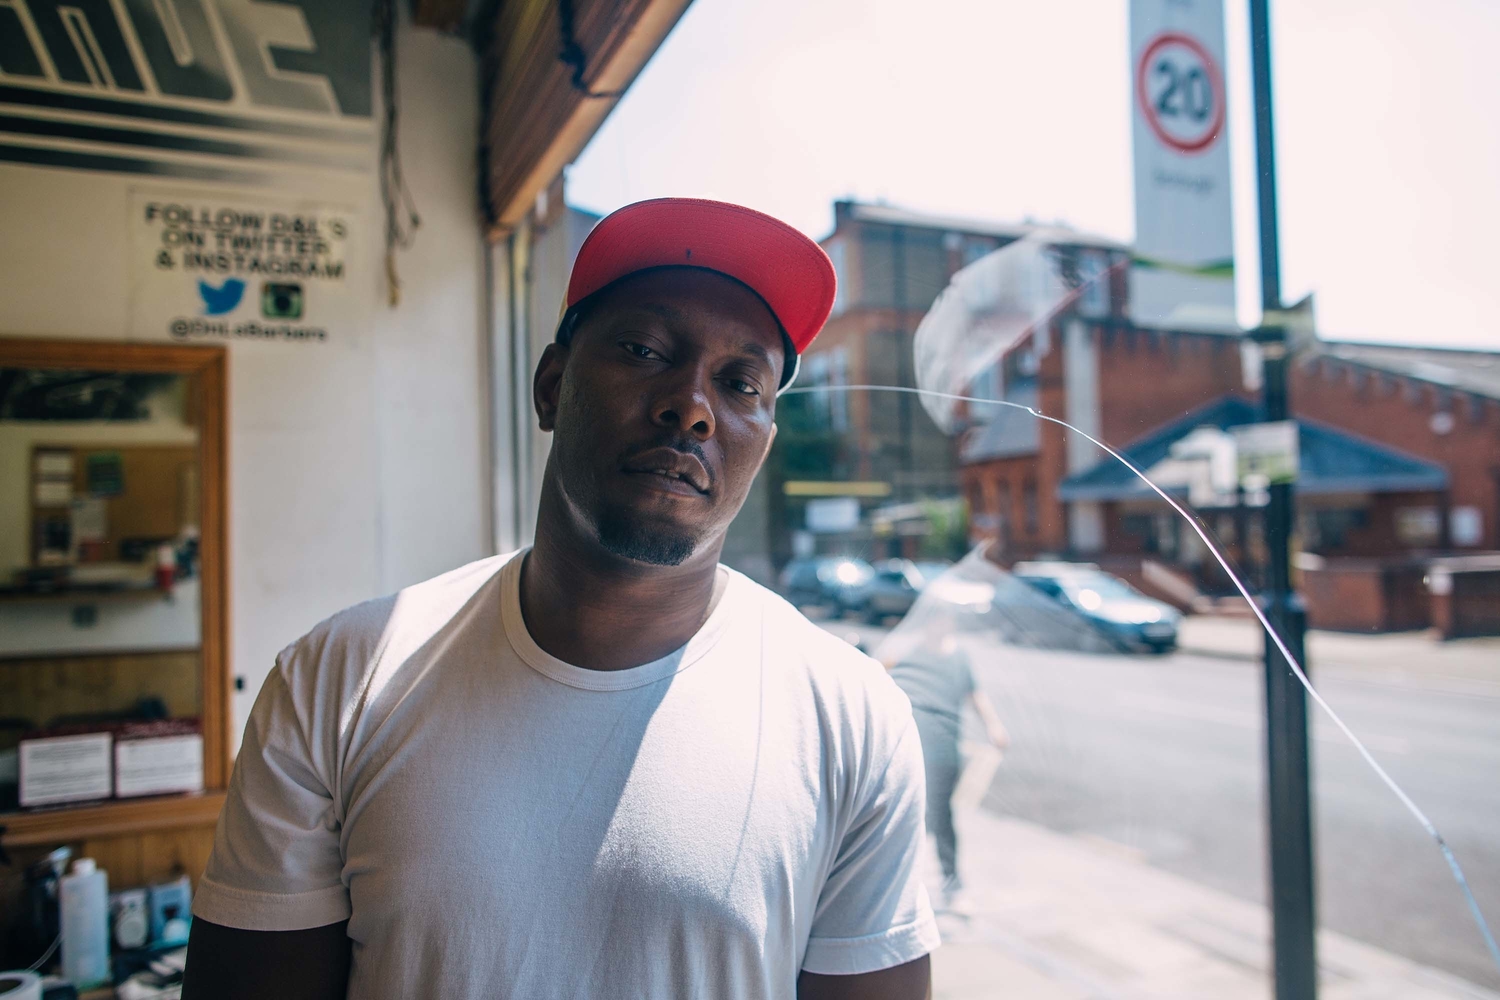 Dizzee Rascal and Skepta join forces on new song ‘Money Right’